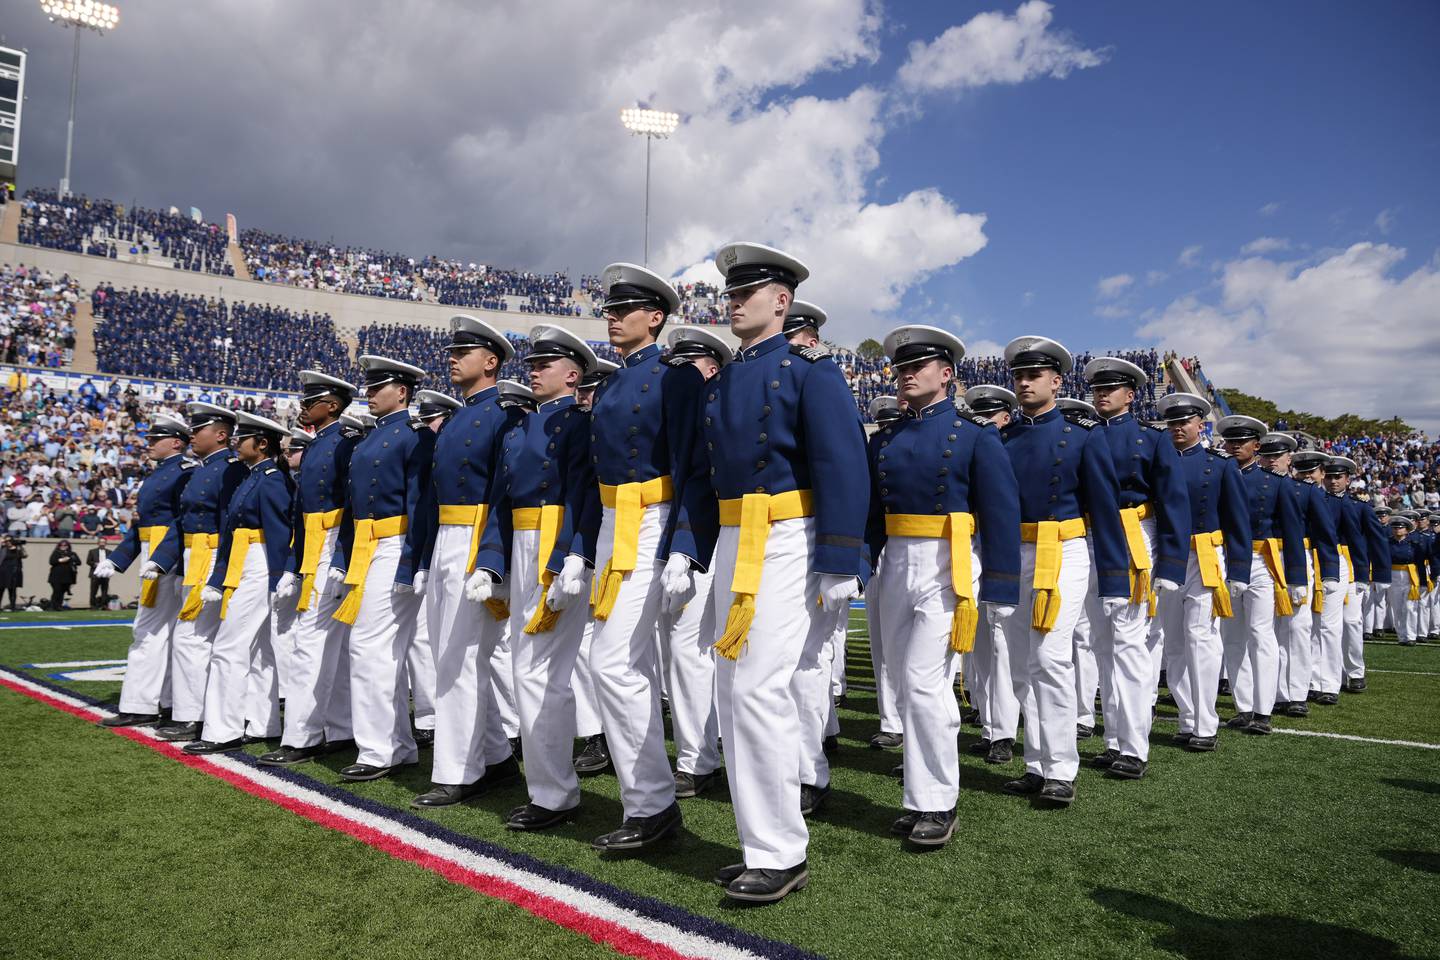 Cadets walk into position during the 2023 Air Force Academy Graduation Ceremony at Falcon Stadium, Thursday, June 1, 2023, at the United States Air Force Academy in Colorado Springs, Colo.